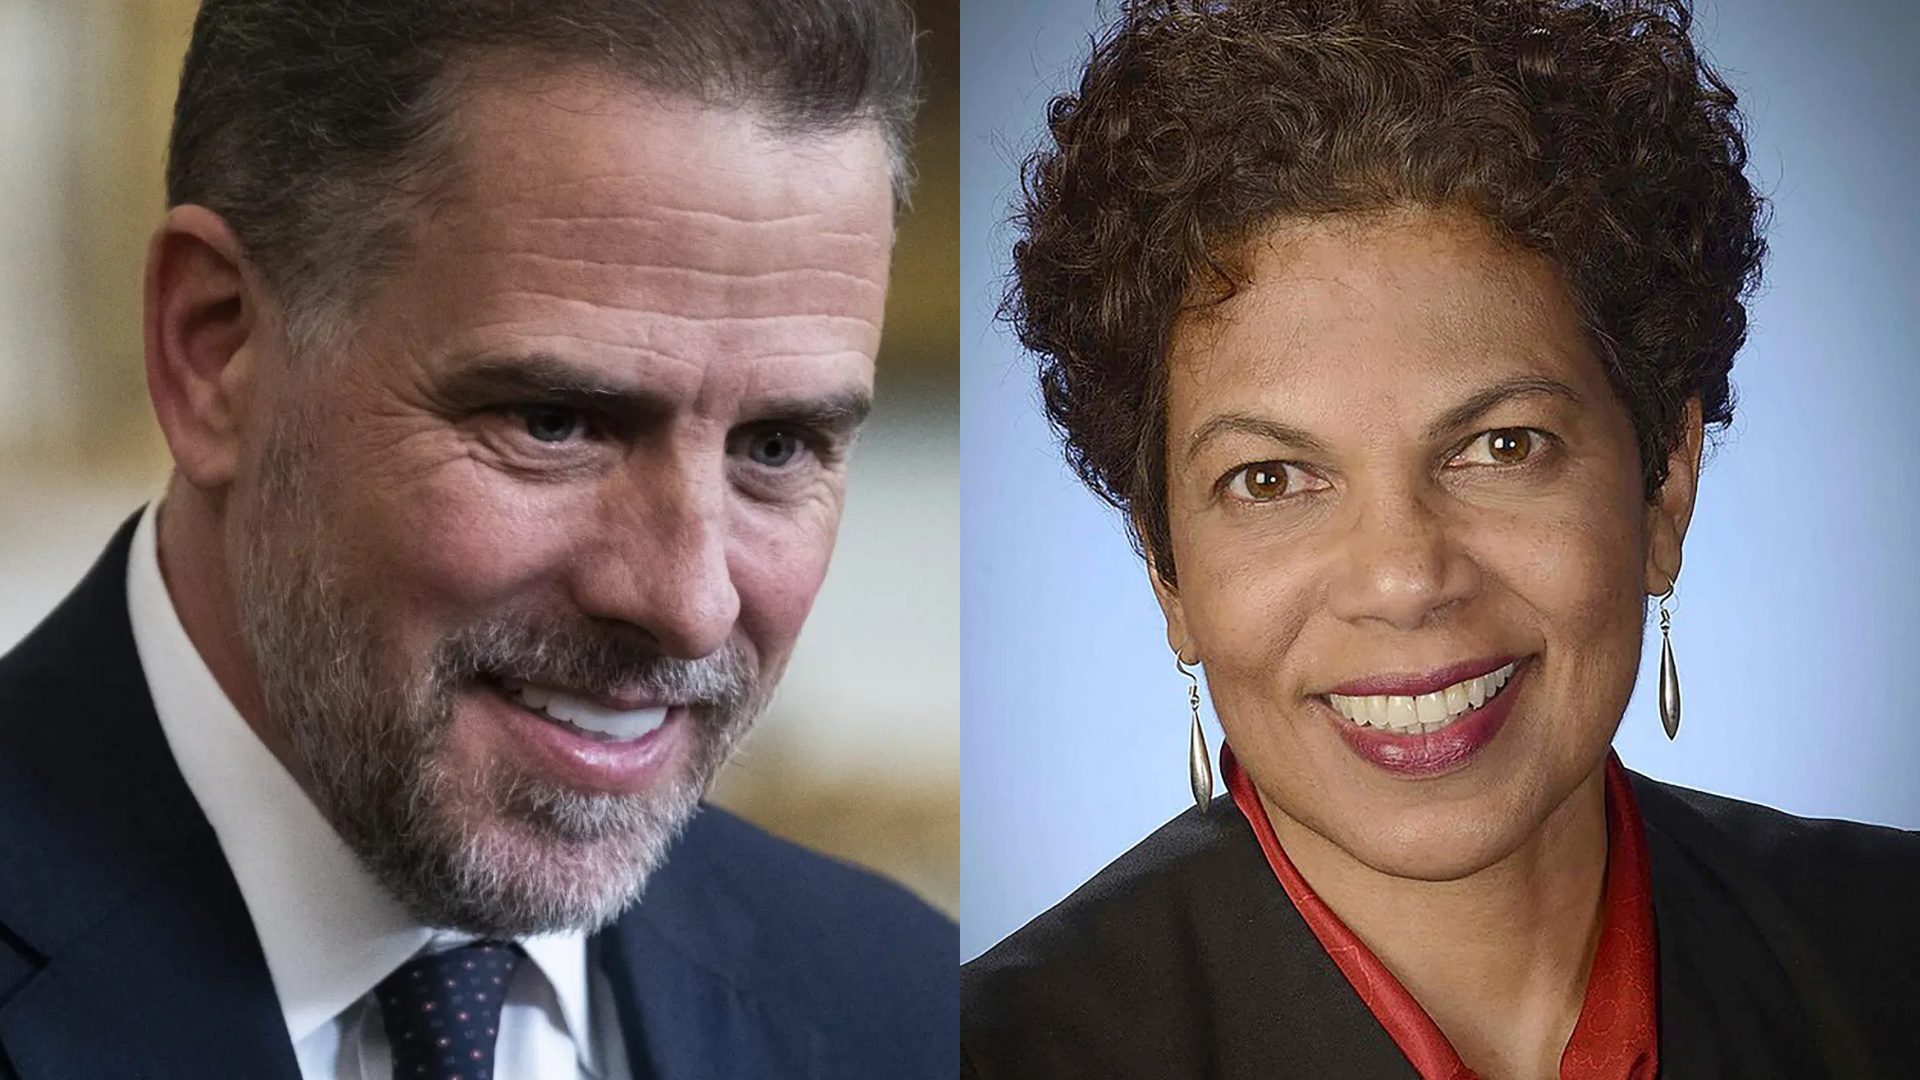 You Can’t Make This Up: Obama-Appointed Judge Tanya Chutkan and Hunter Biden Shared Professional Ties at Boies Schiller Flexner, Firm that Worked for Burisma